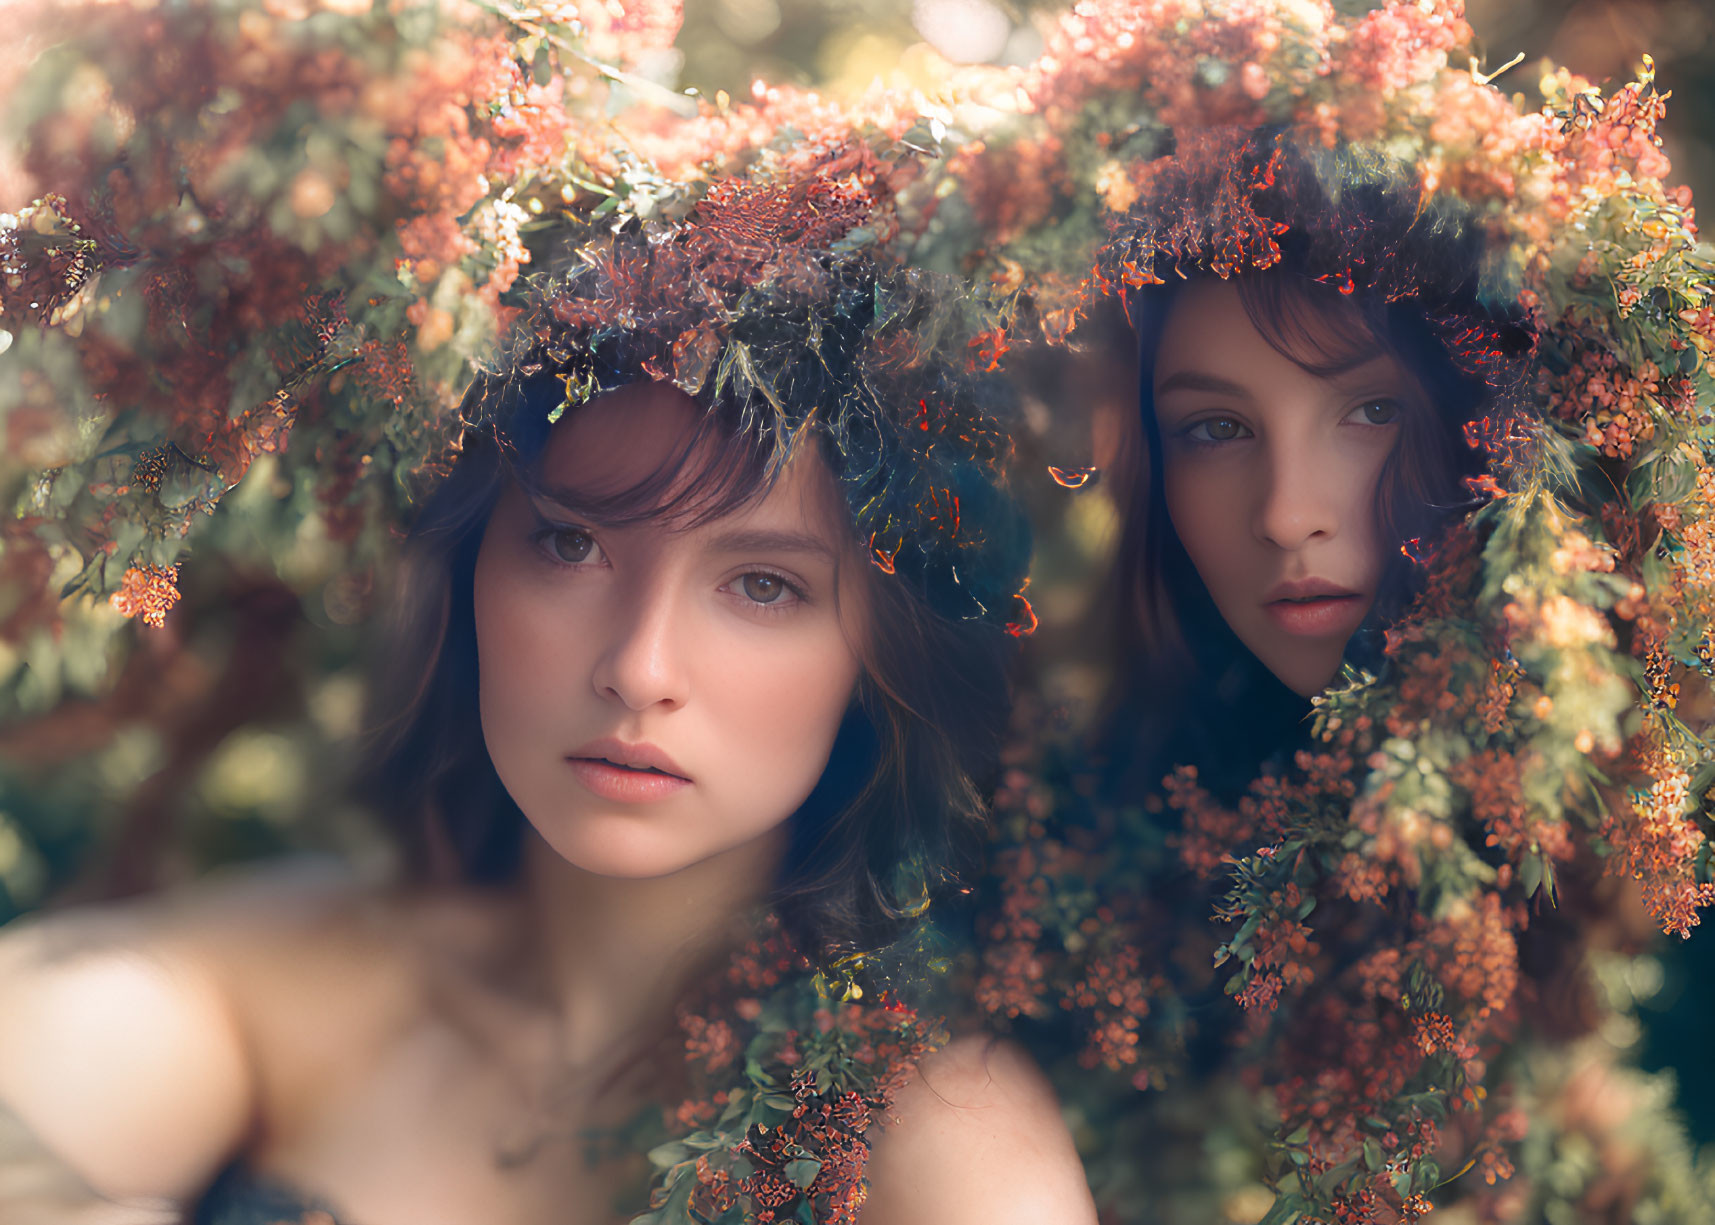 Two women obscured by floral branches in soft-focus with dreamy lighting.